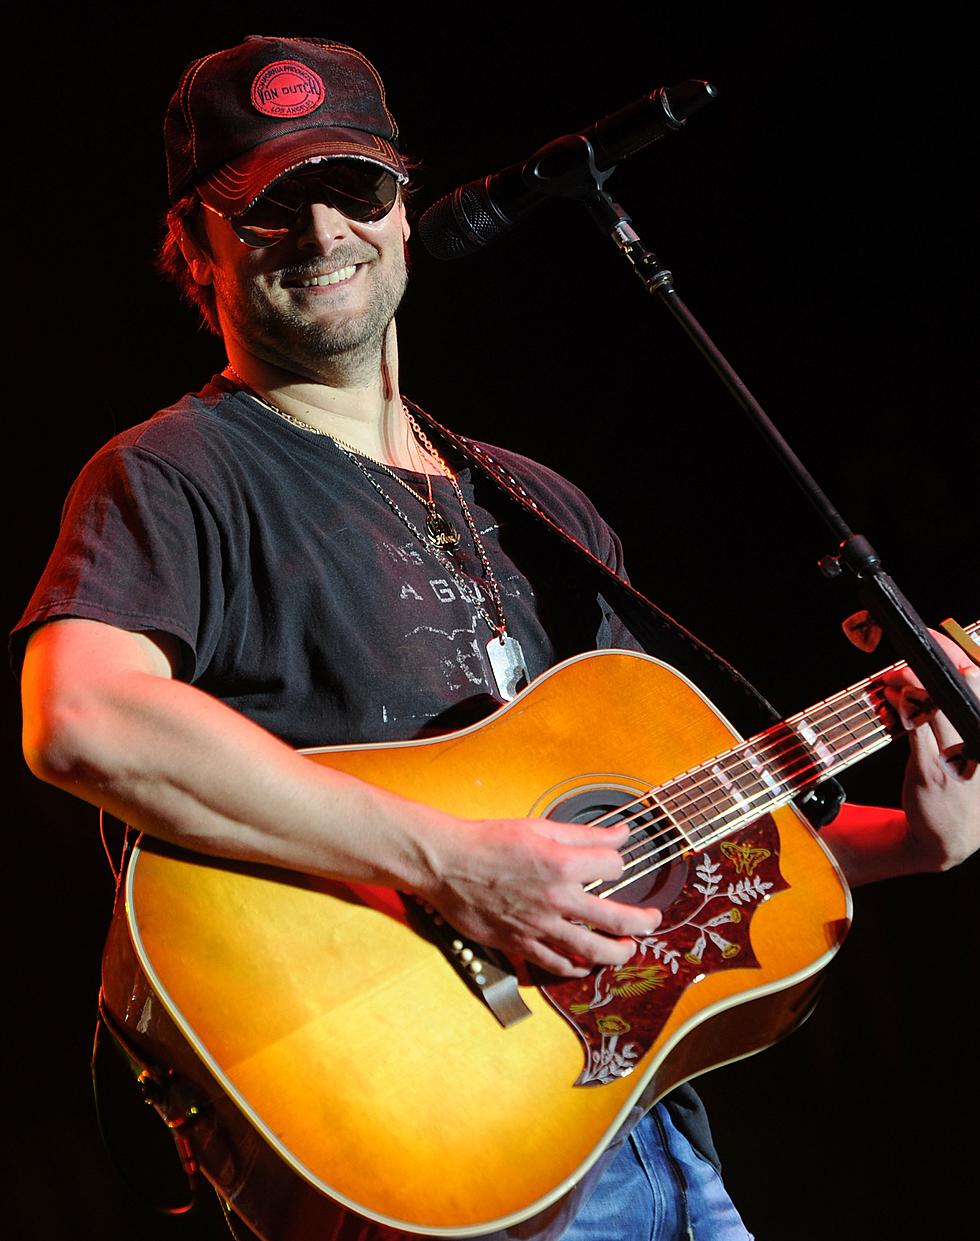 Enter To Win An Autographed Eric Church Photo Book NOW!